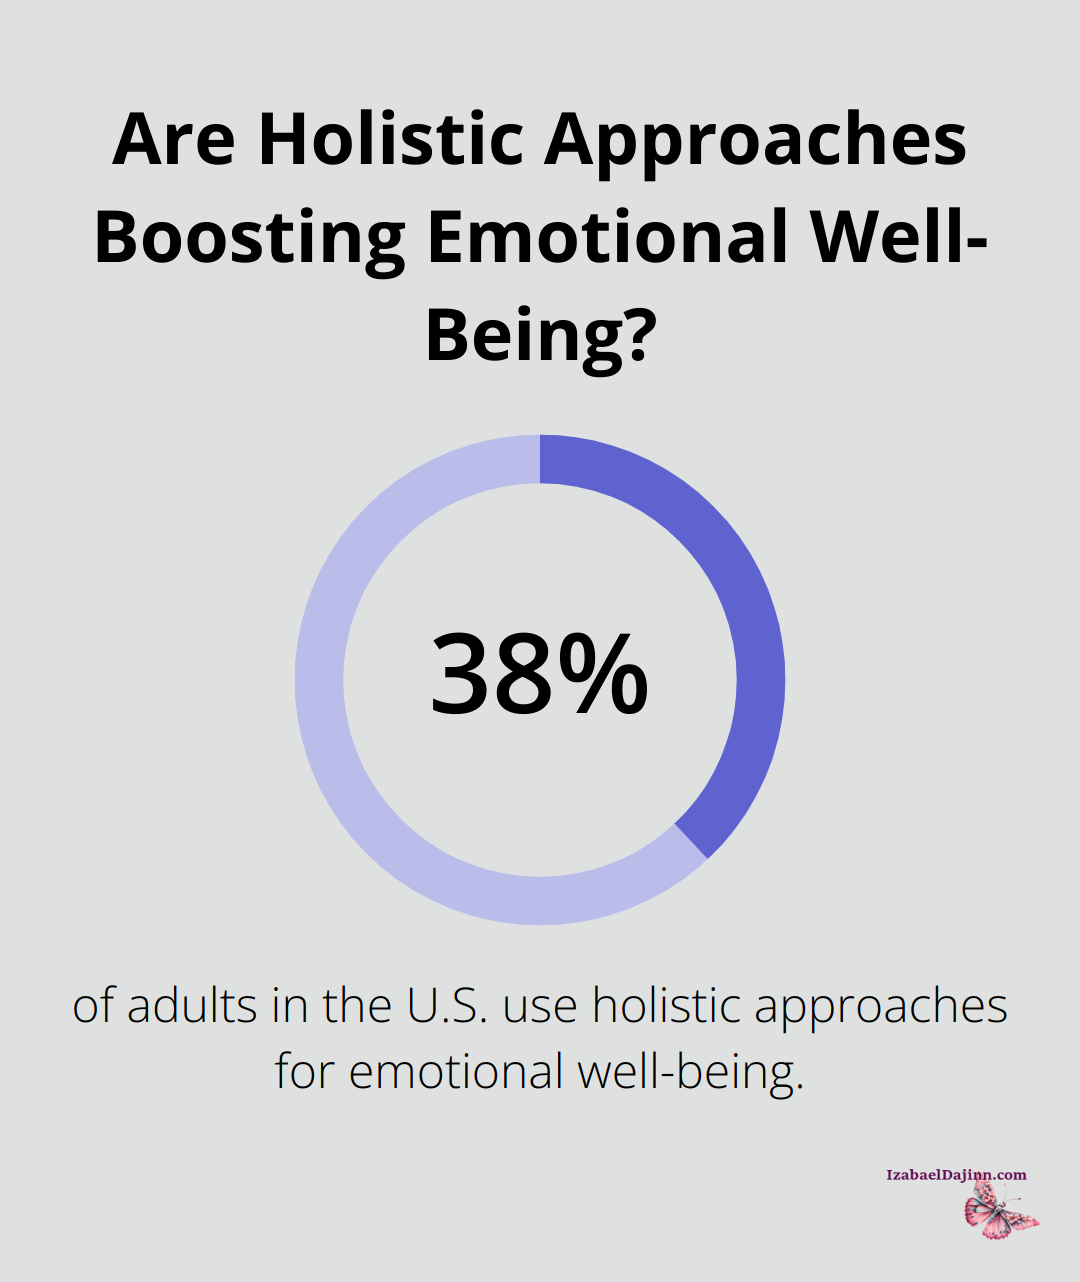 Are Holistic Approaches Boosting Emotional Well-Being?